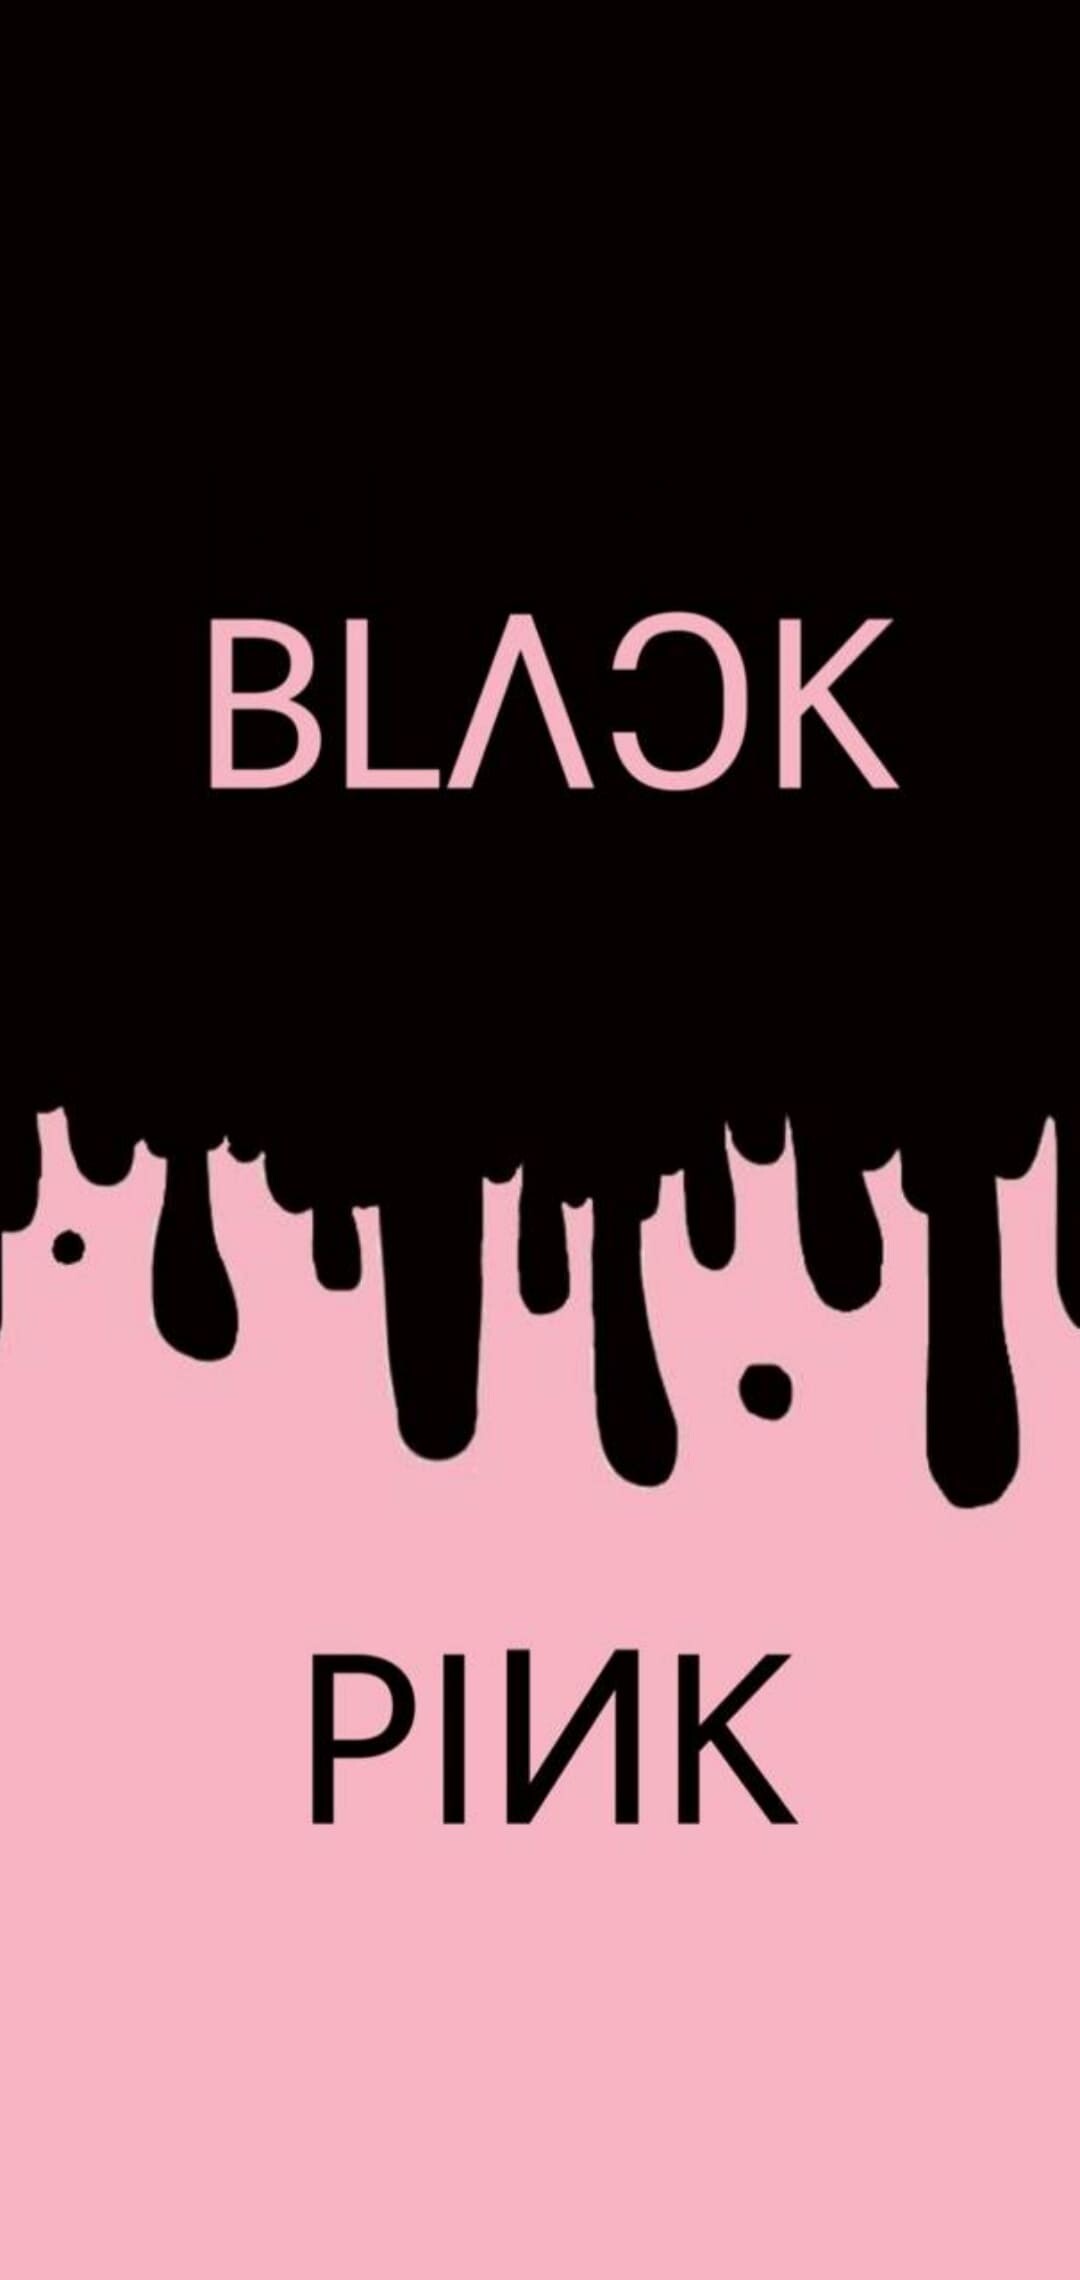 BLACKPINK: The Album, (2020), became the first album by a Korean girl group to sell more than one million copies. 1080x2280 HD Background.